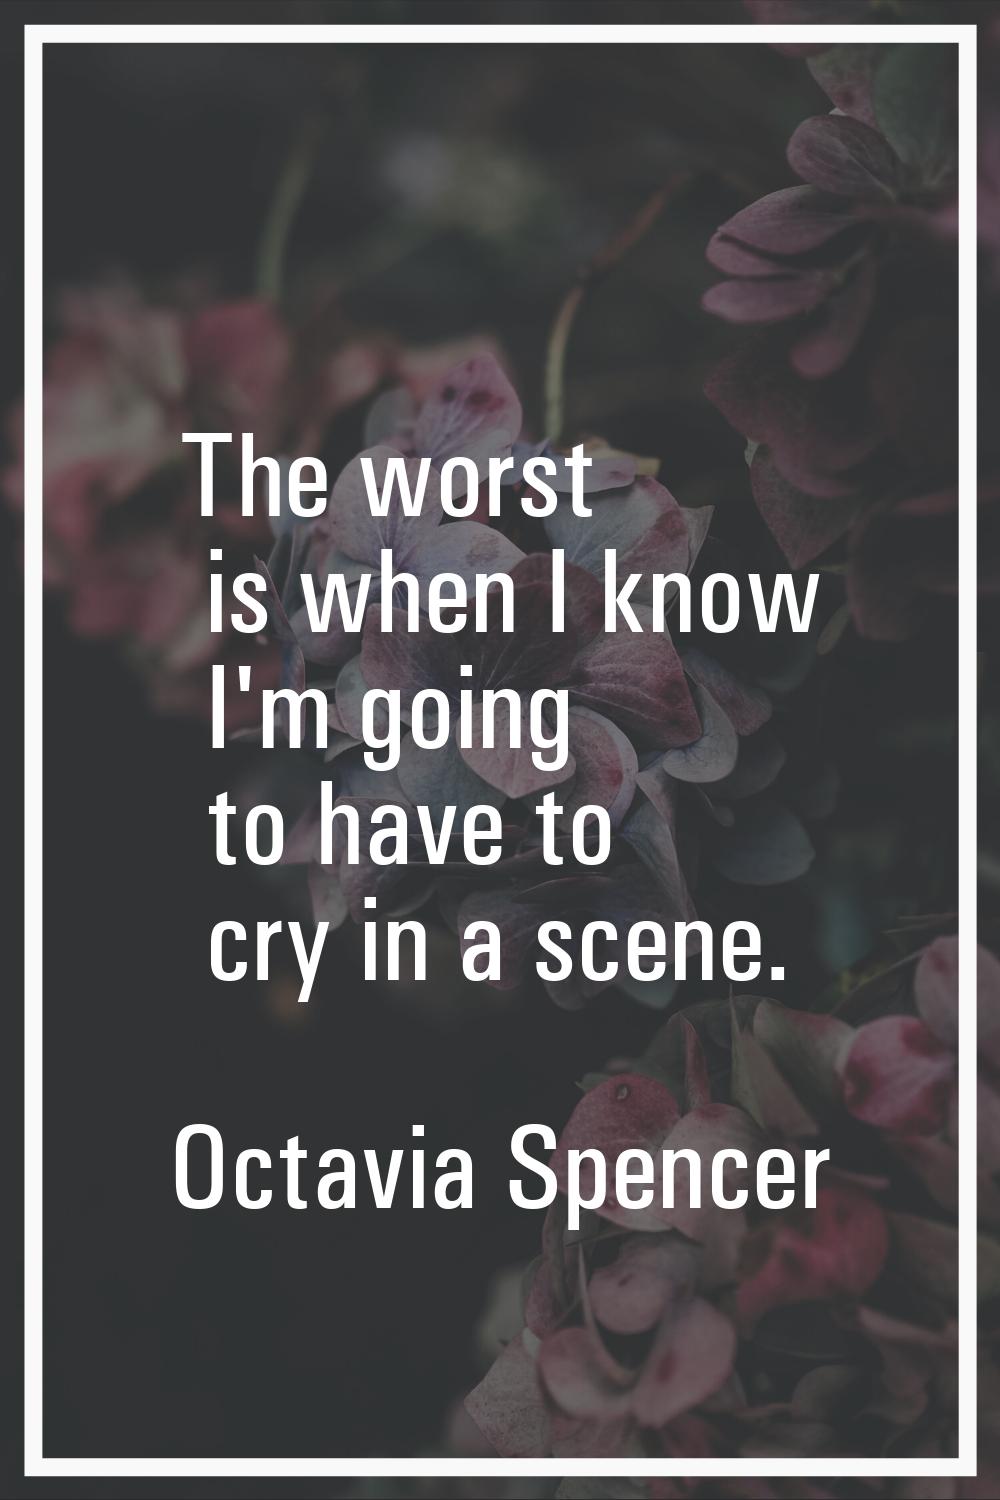 The worst is when I know I'm going to have to cry in a scene.